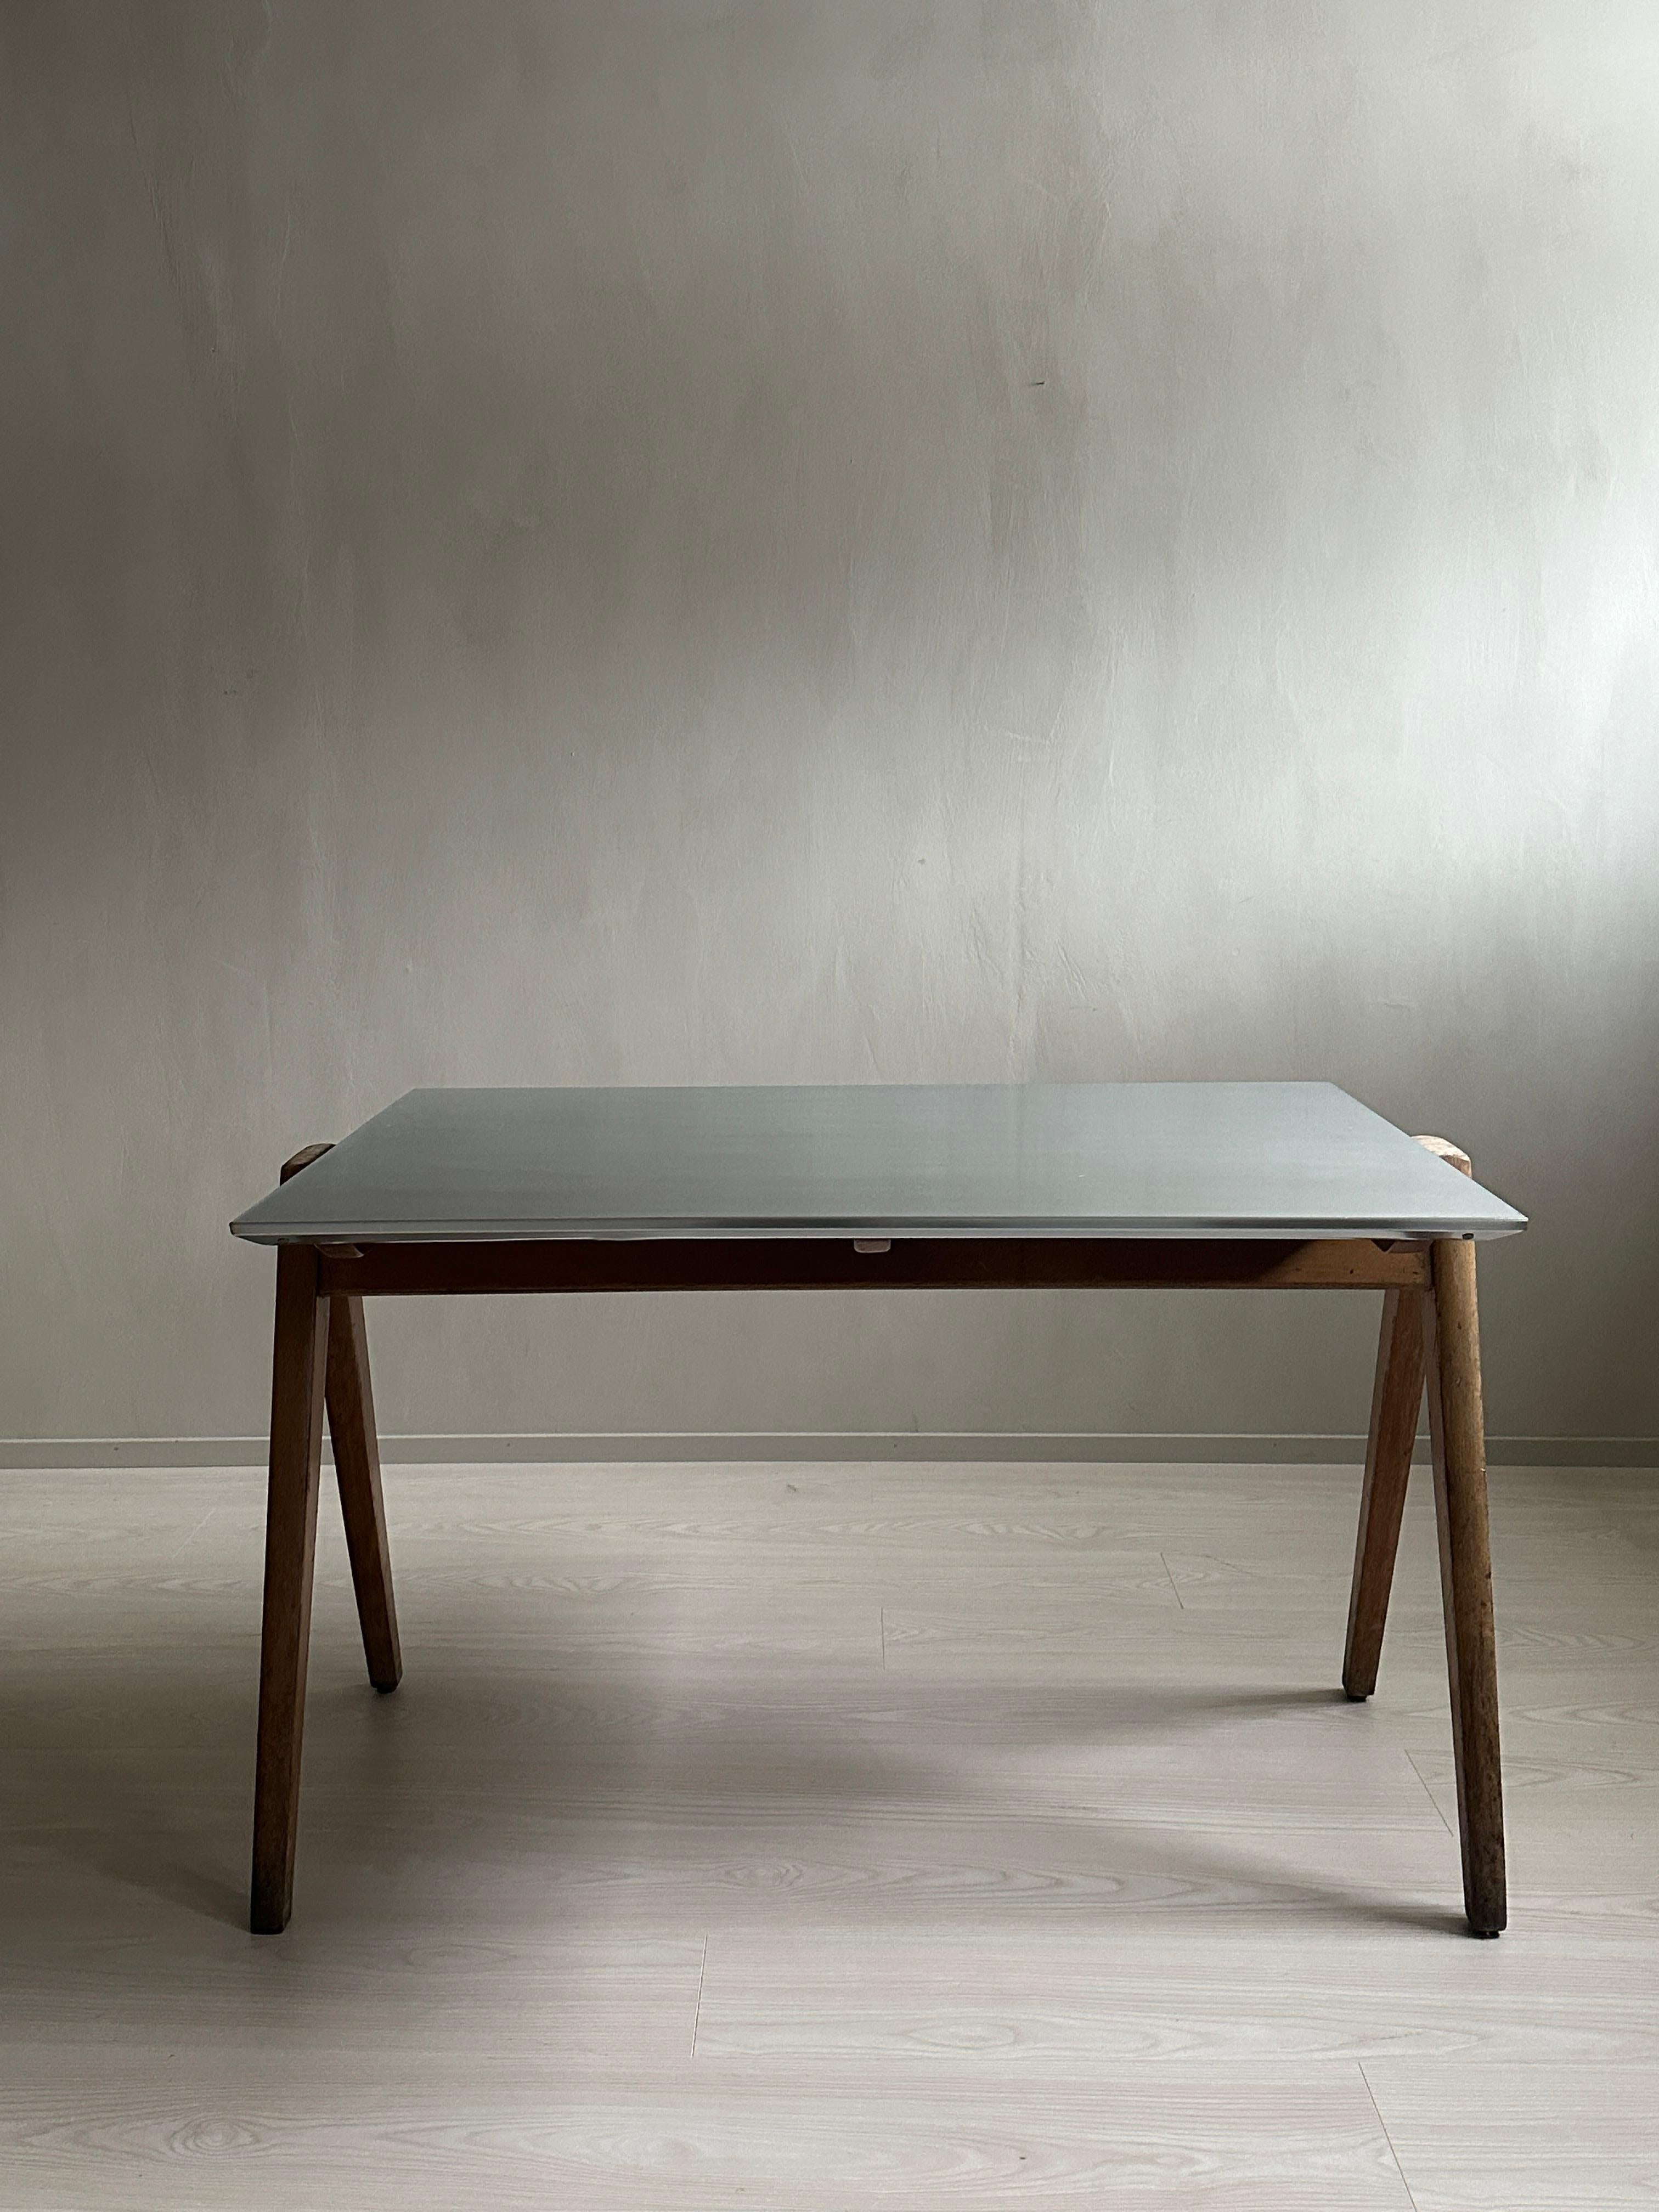 This midcentury desk is designed by renowned designer Robin Day, known for his contributions to modern furniture design. 

The desk is characterized by its sleek and minimalist aesthetic, featuring a zinc top that adds a touch of industrial flair.